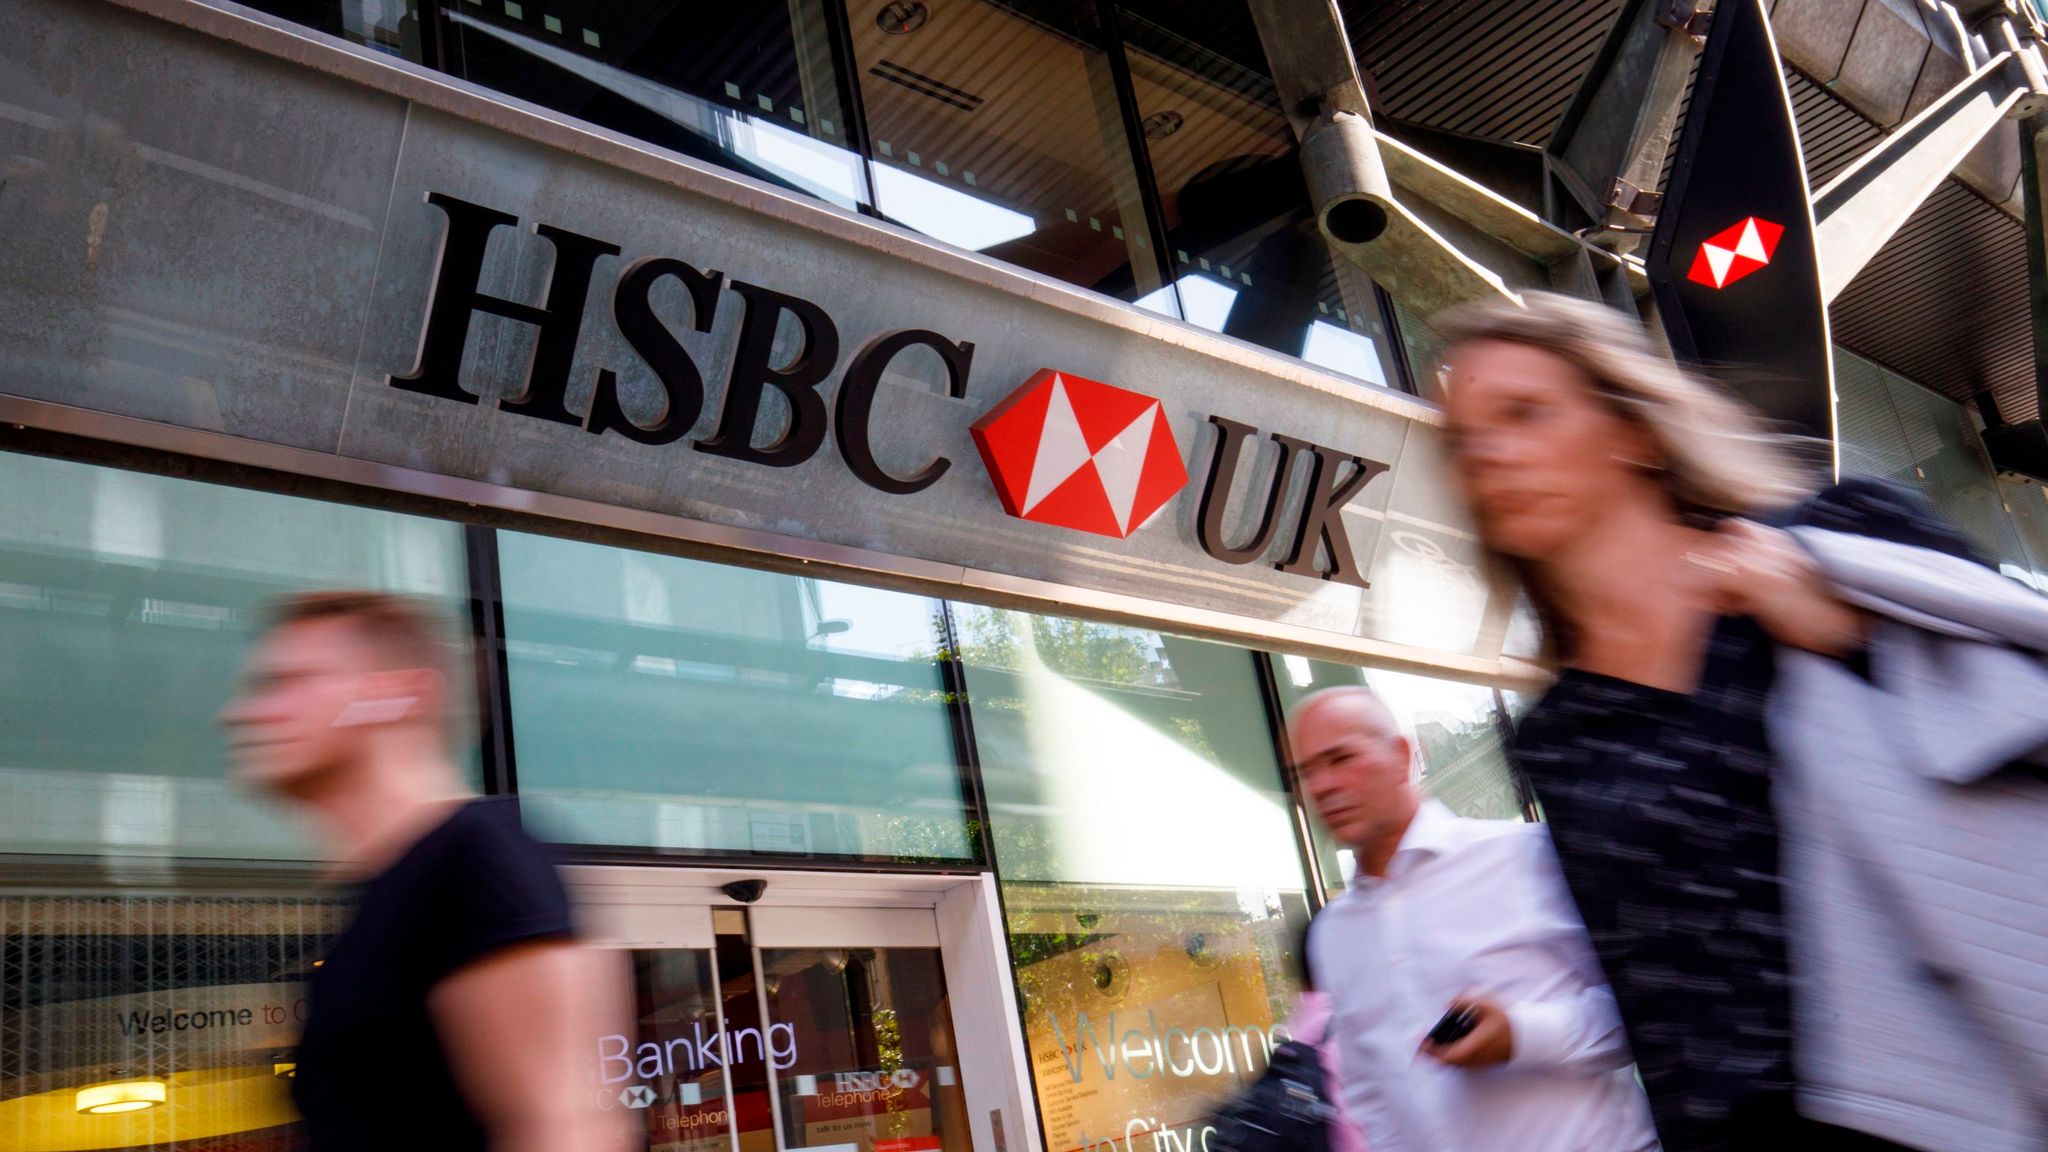 Hsbc To Cut 35000 Jobs And Shed Assets In Major Overhaul Business News Sky News 8388